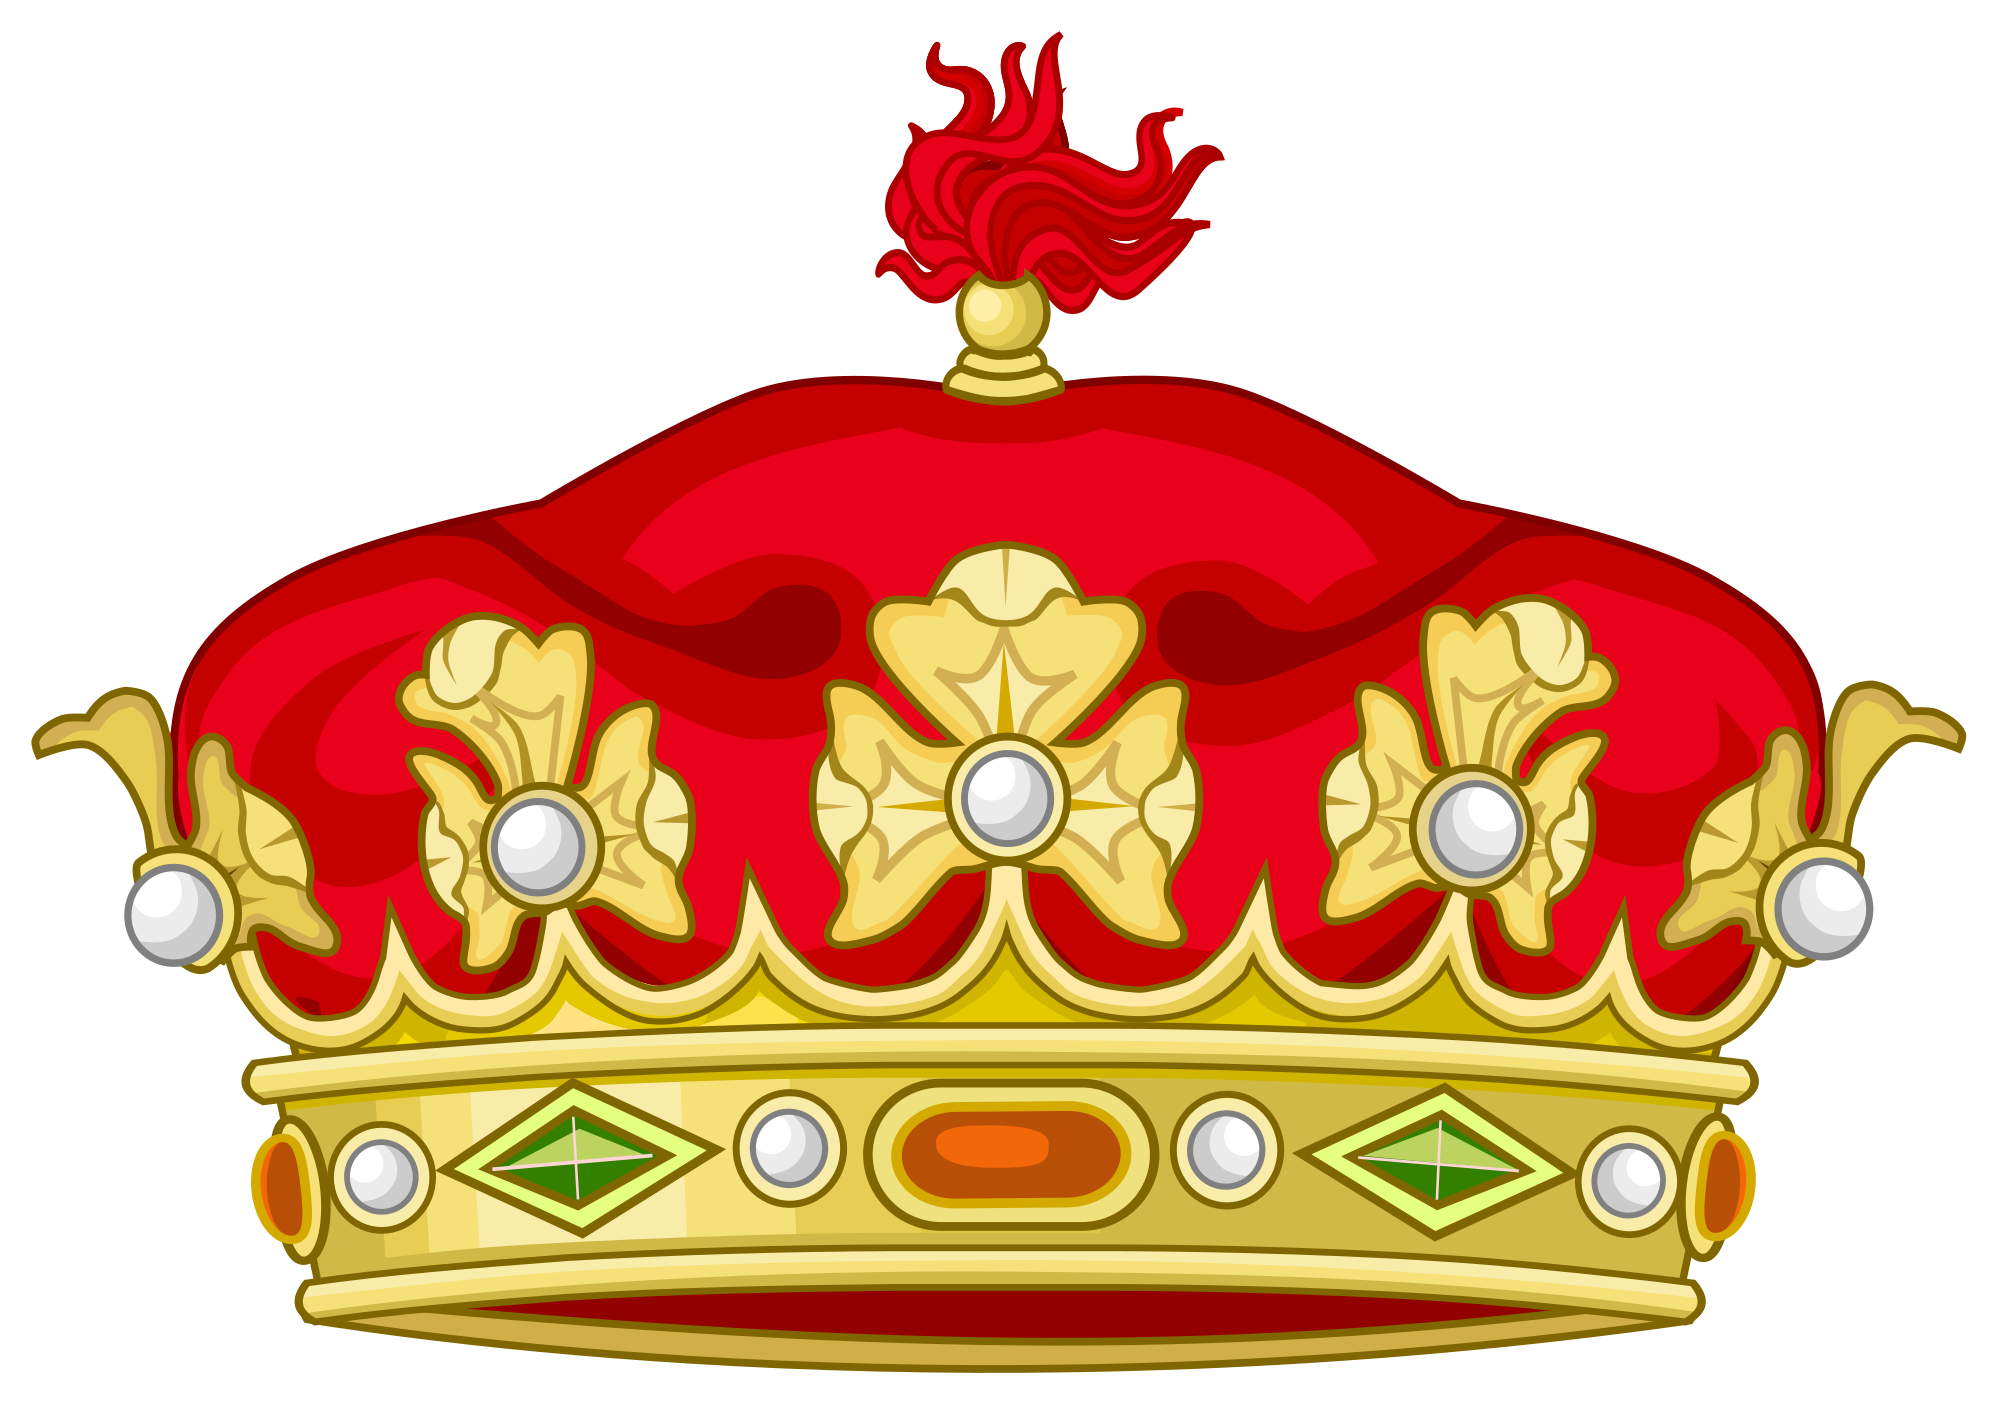 Crowns clipart svg. File heraldic crown of